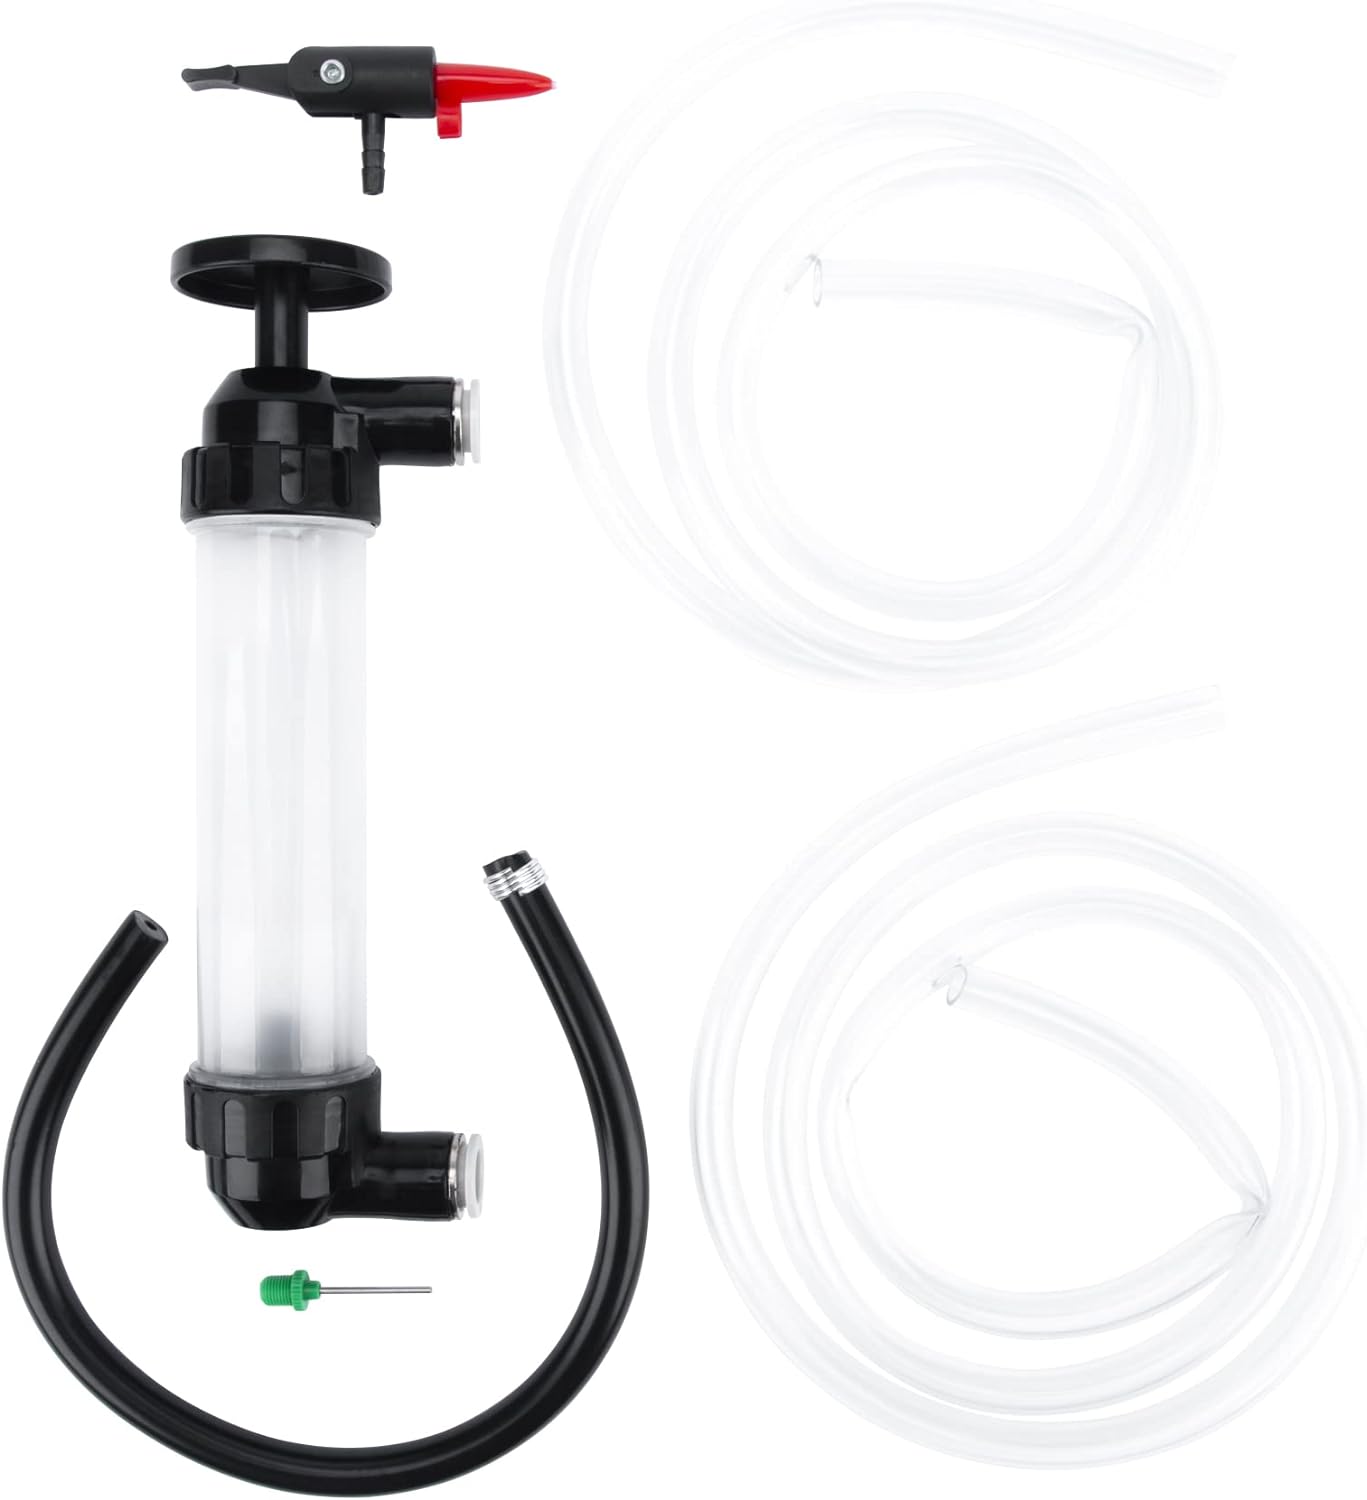 Performance Tool W1156 Grip Clip Transfer Pump/ Siphon Fluid Transfer Pump Kit for Water, Oil, Liquid, and Air, Black/Clear, 48-inch Hoses $9.82